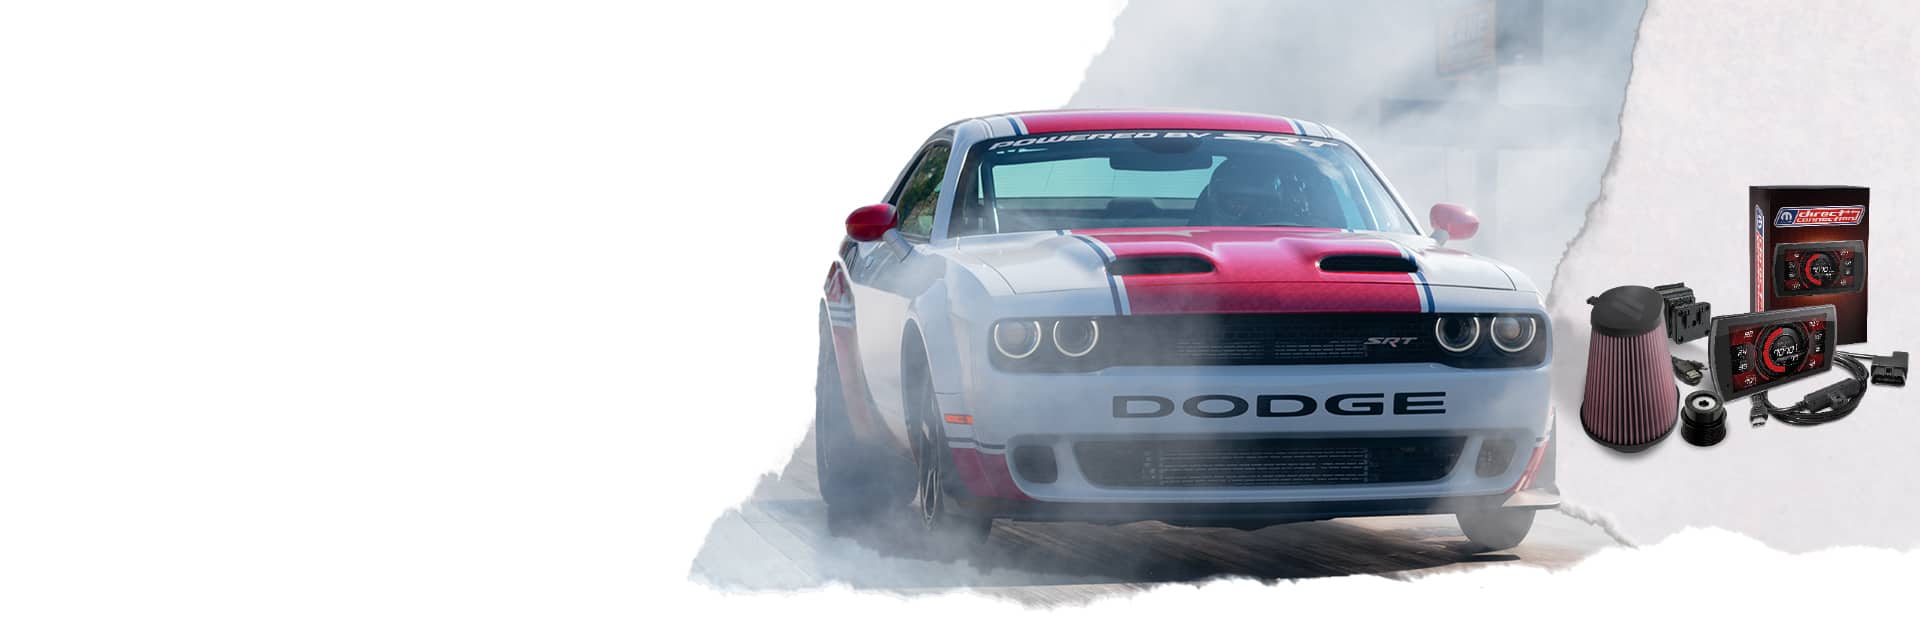 The Dodge Challenger SRT Hellcat with Mopar Drag Pak. The components of the Direct Connection engine tuner kit.